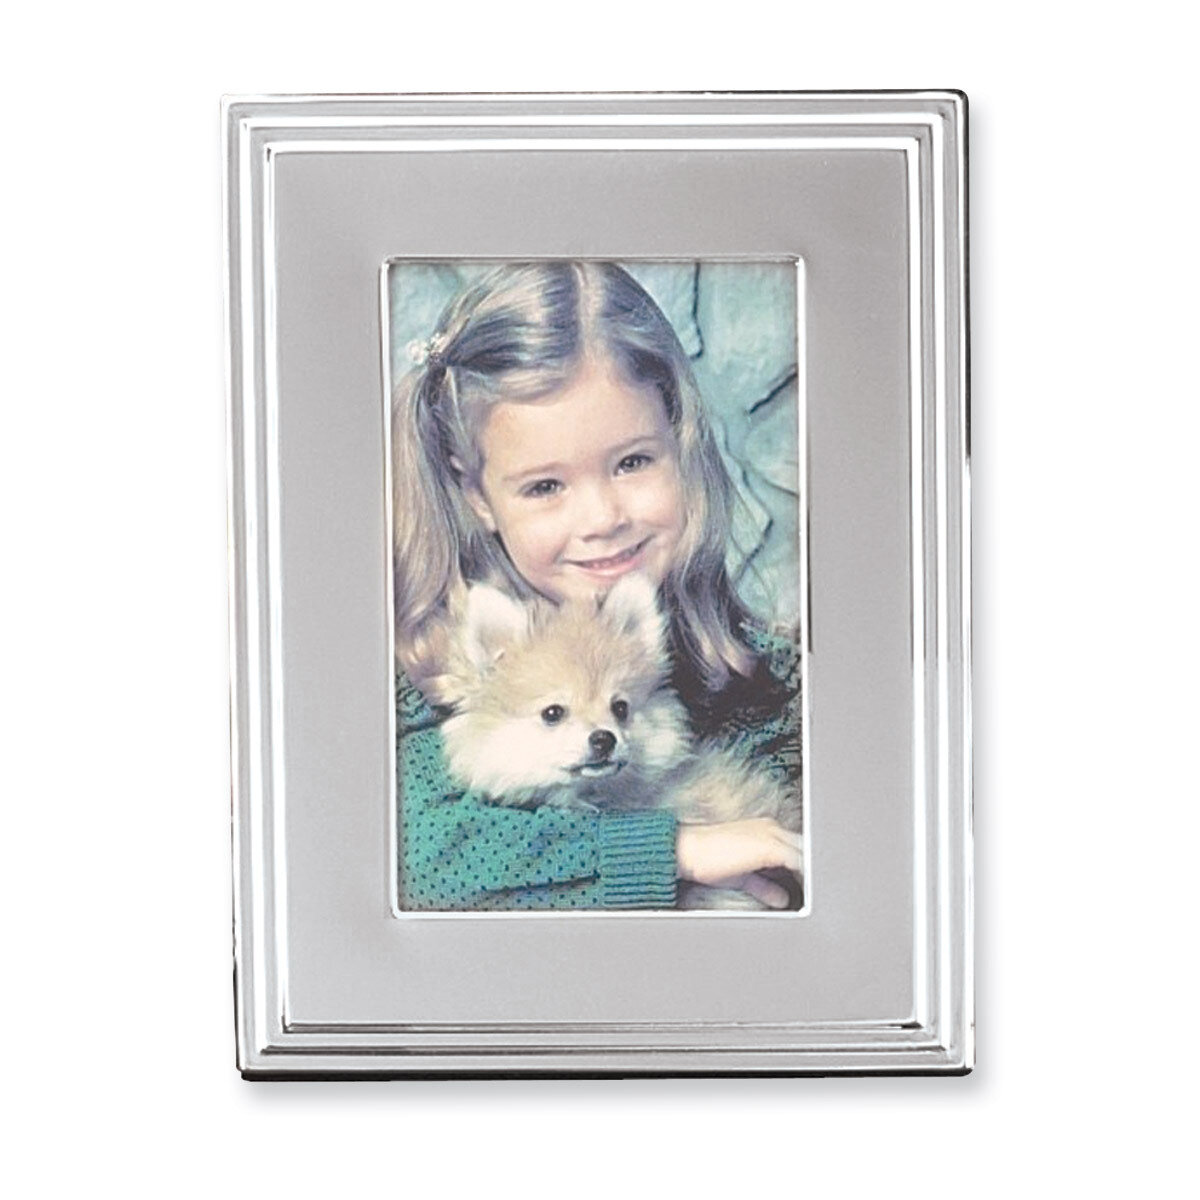 Silver-plated 8 x 10 Inch Picture Frame GP9998